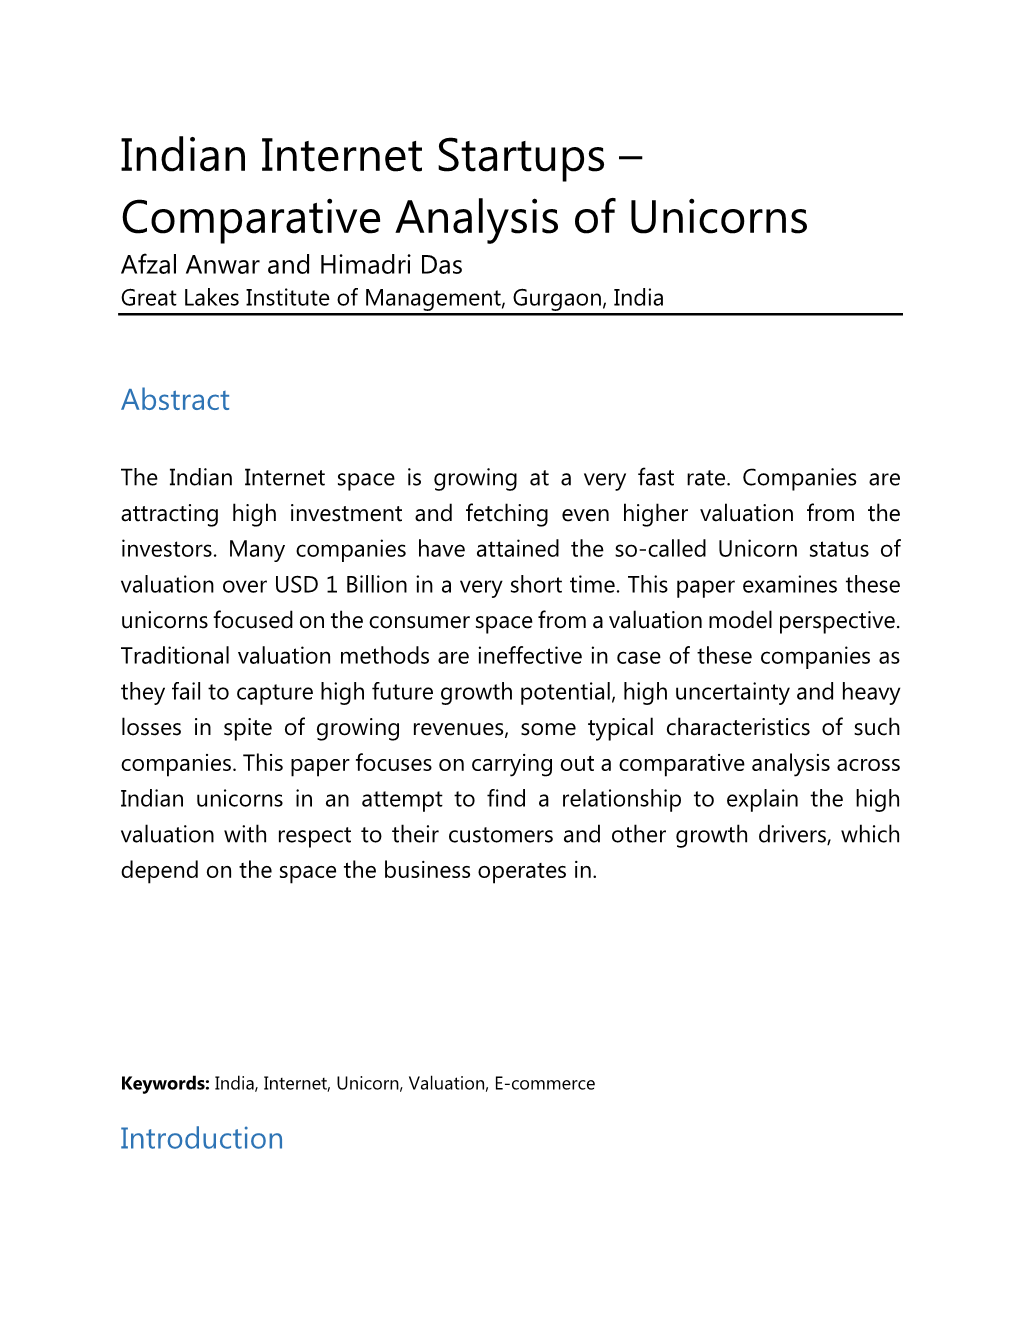 Indian Internet Startups – Comparative Analysis of Unicorns Afzal Anwar and Himadri Das Great Lakes Institute of Management, Gurgaon, India